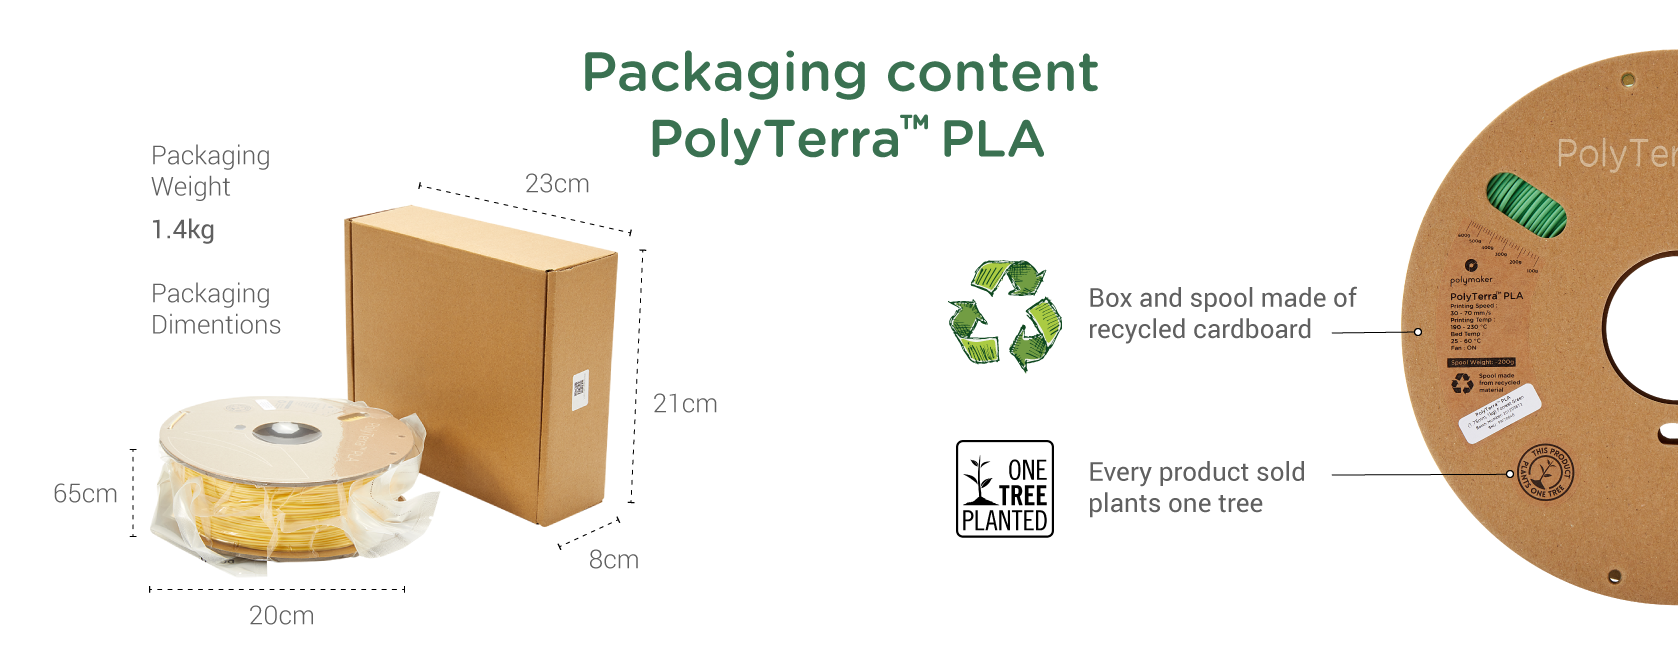 PolyTerra packaging content